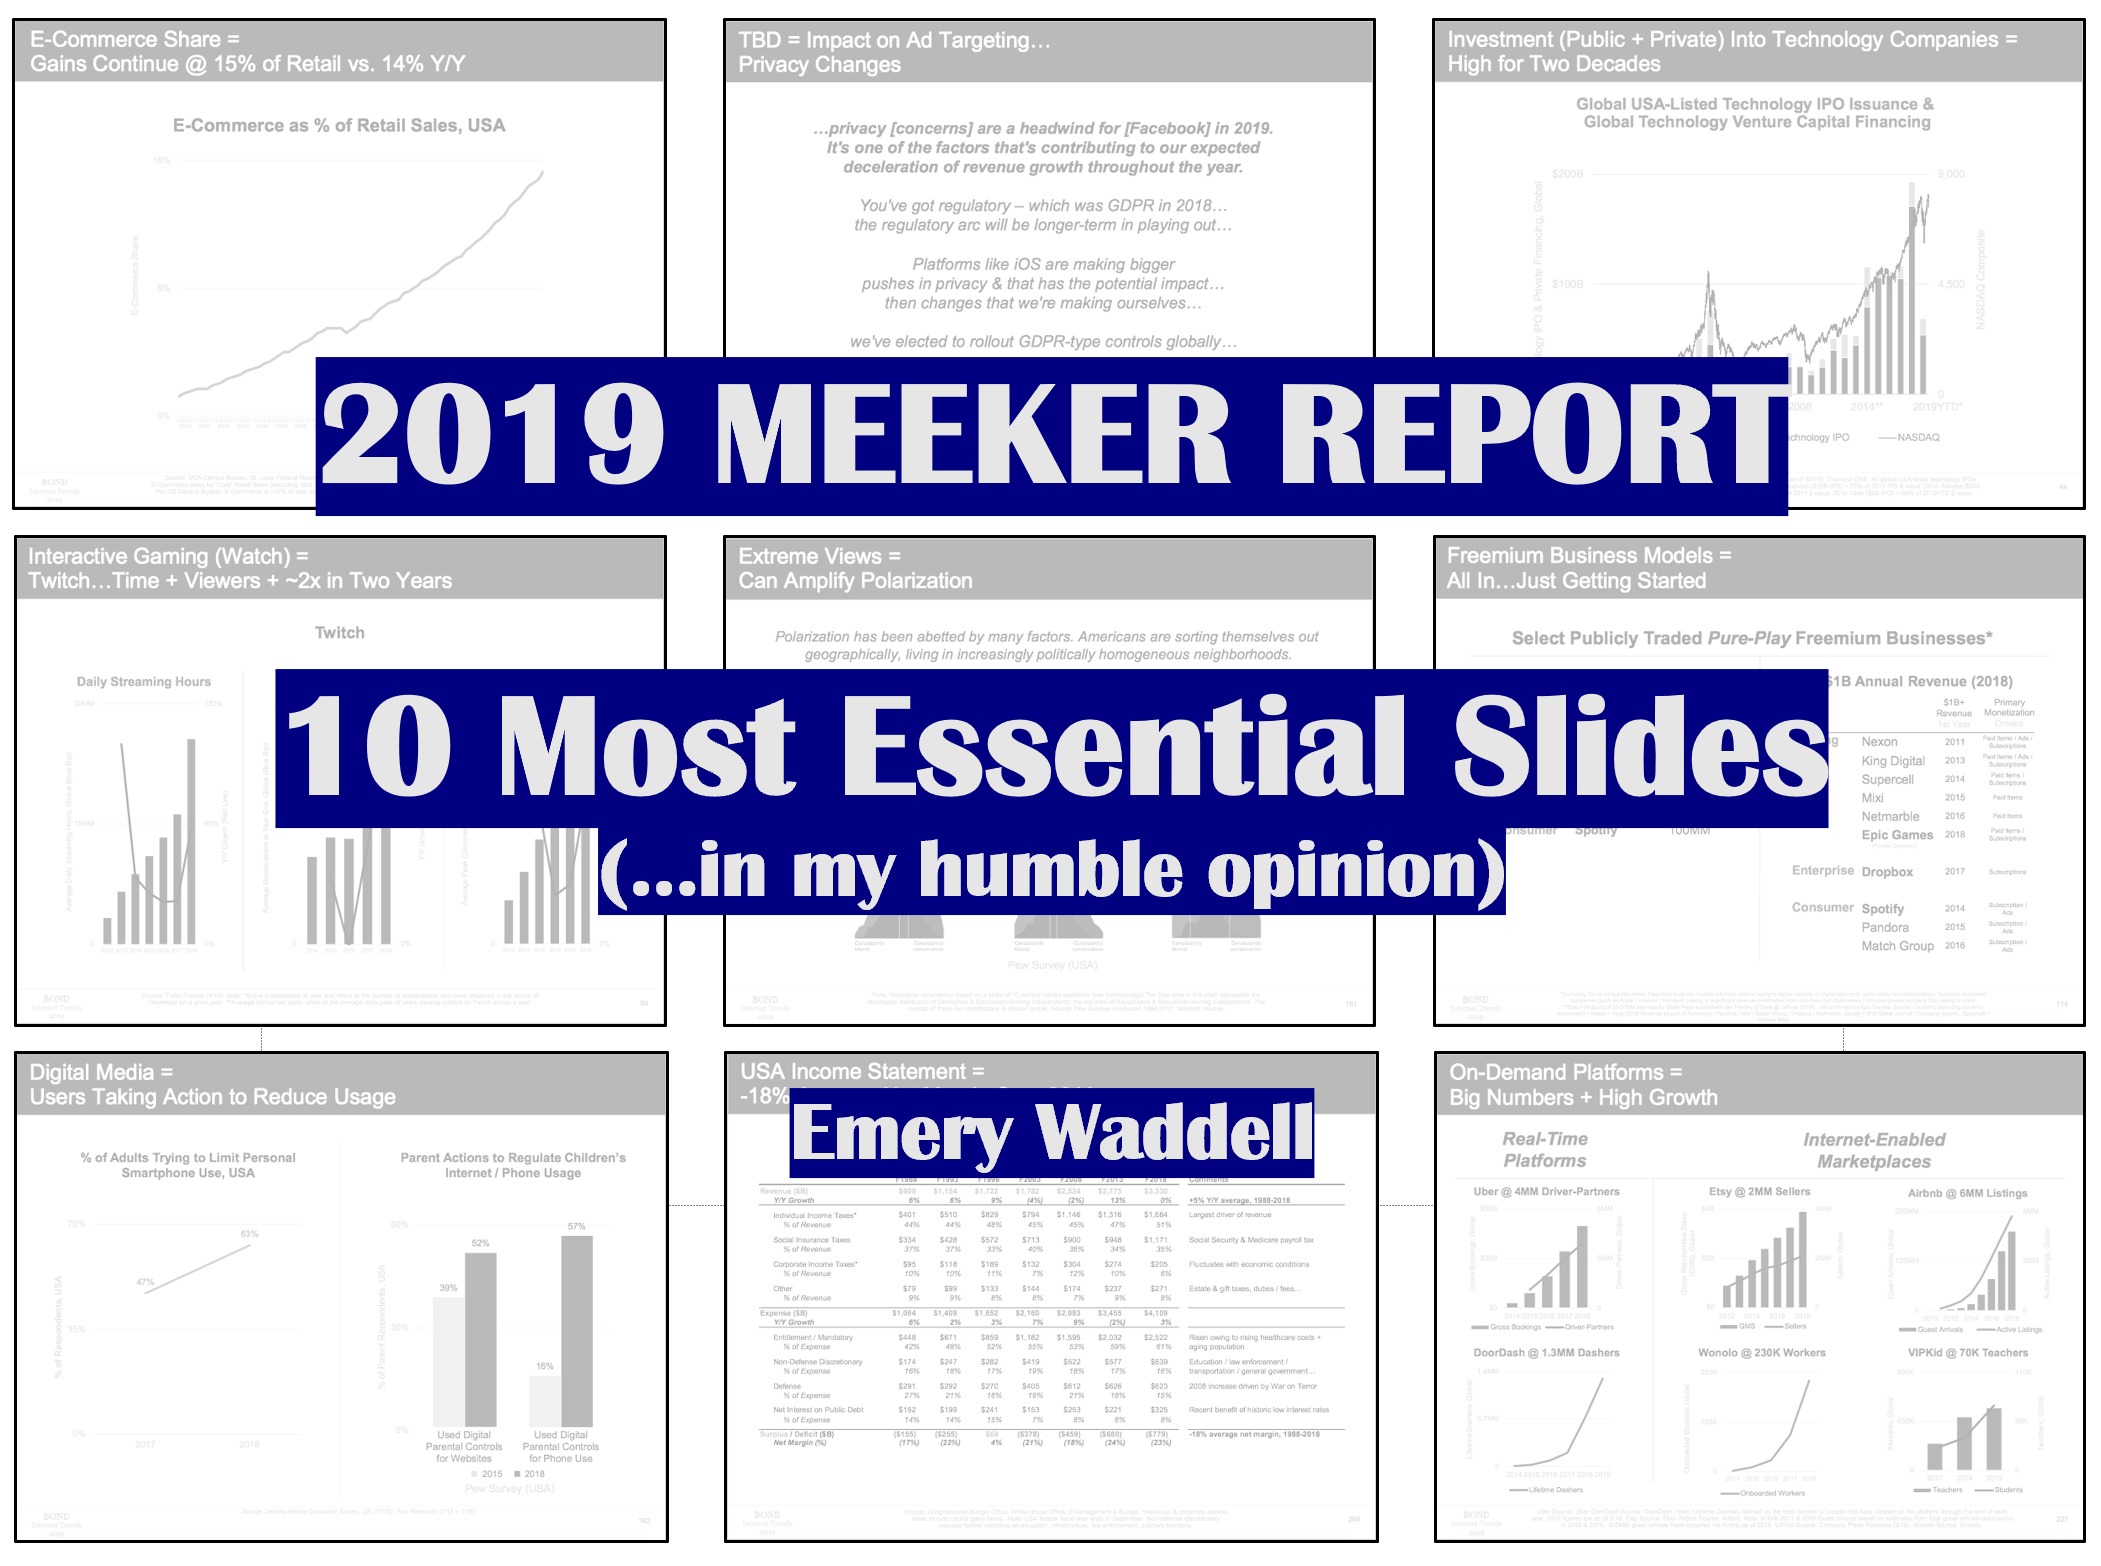 10 Most Essential Slides from 2019 Meeker Report